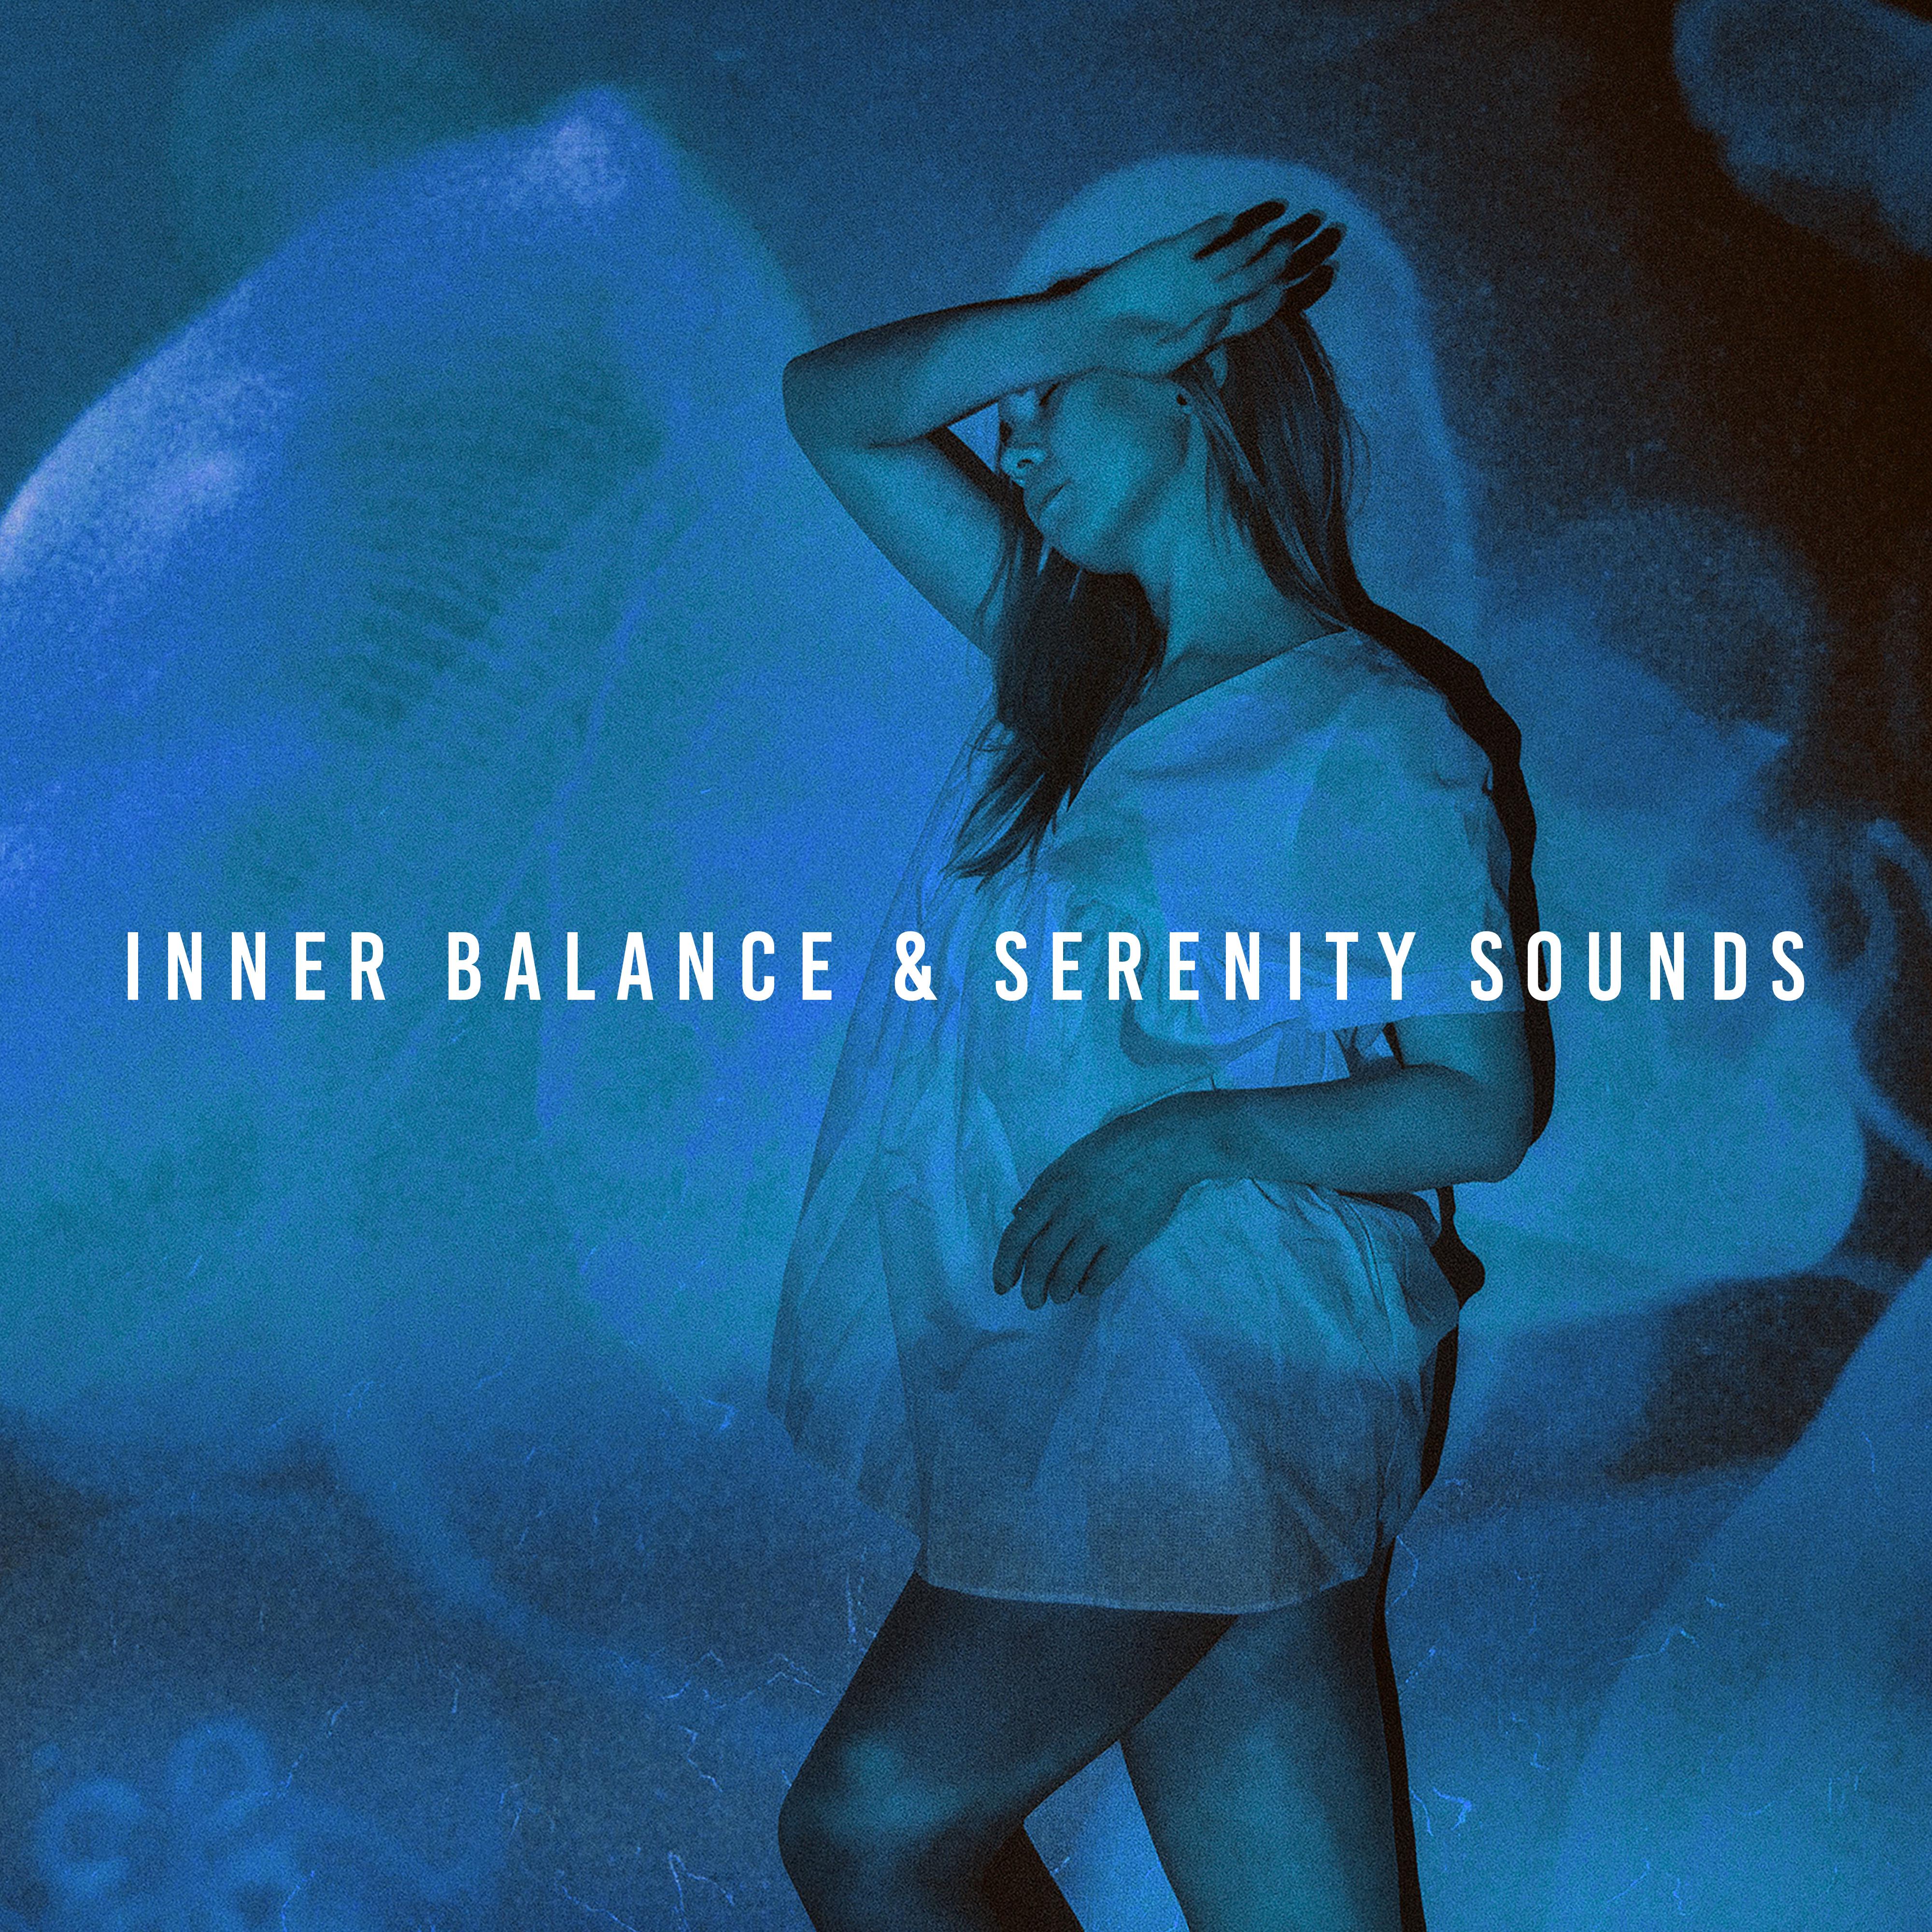 Inner Balance & Serenity Sounds: 2019 New Age Music for Total Calming Down, Deep Relax, Fight with Bad Emotions, Find Your Inner Peace